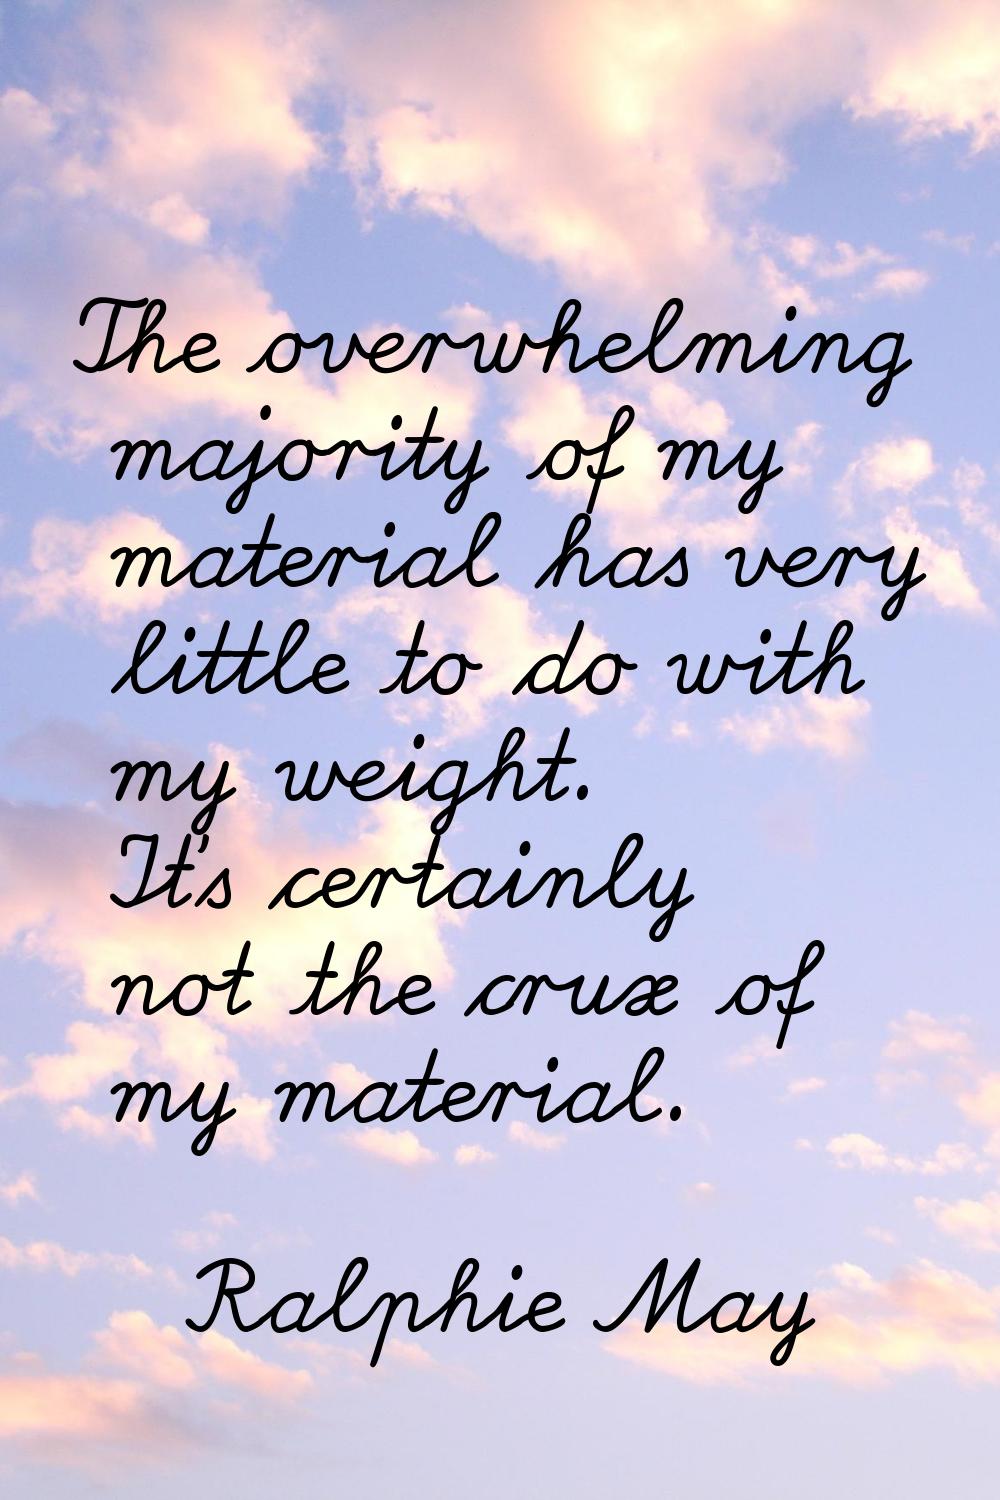 The overwhelming majority of my material has very little to do with my weight. It's certainly not t